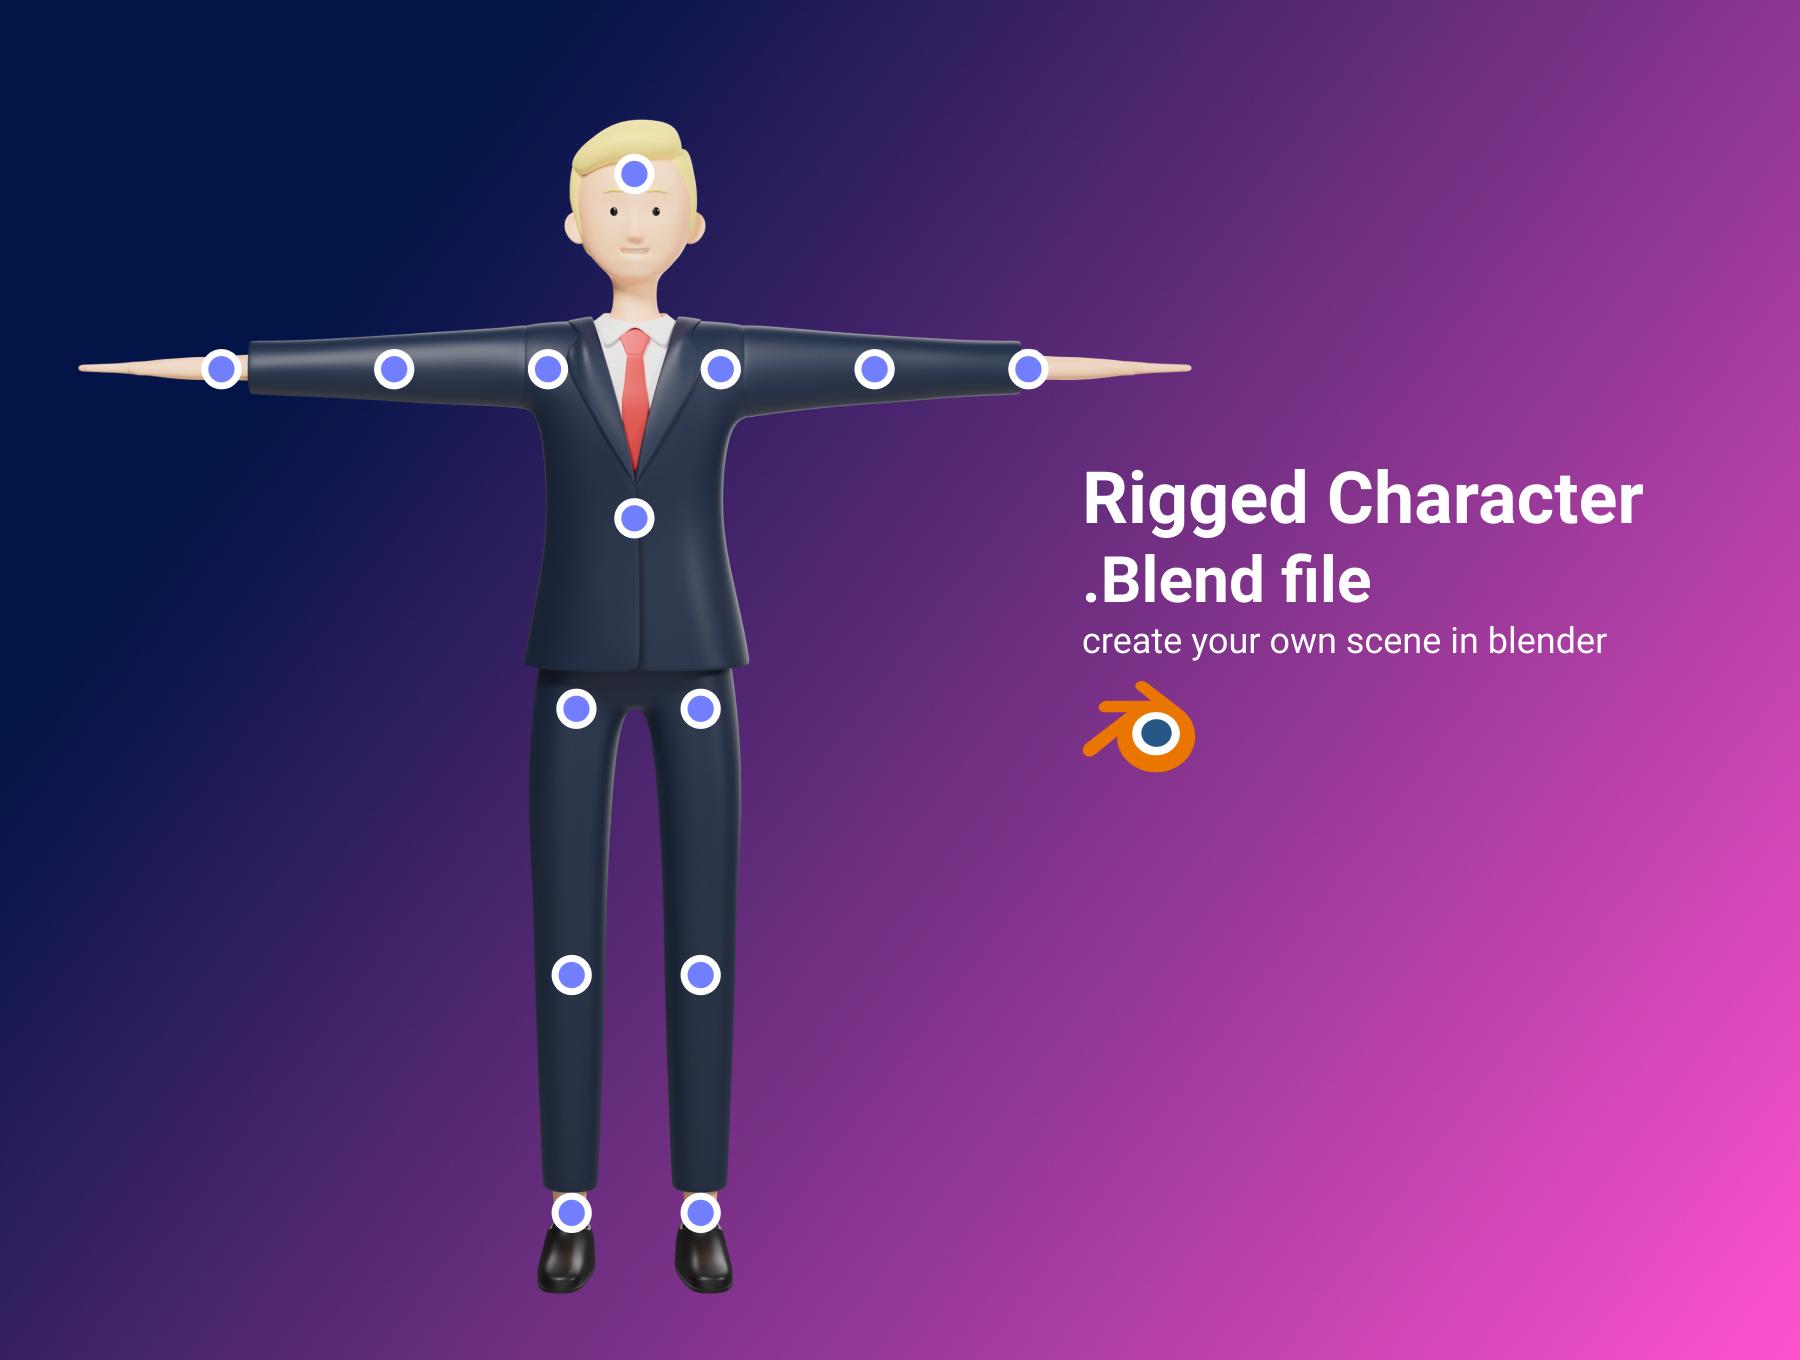 3D Character Pack Crypto Illus